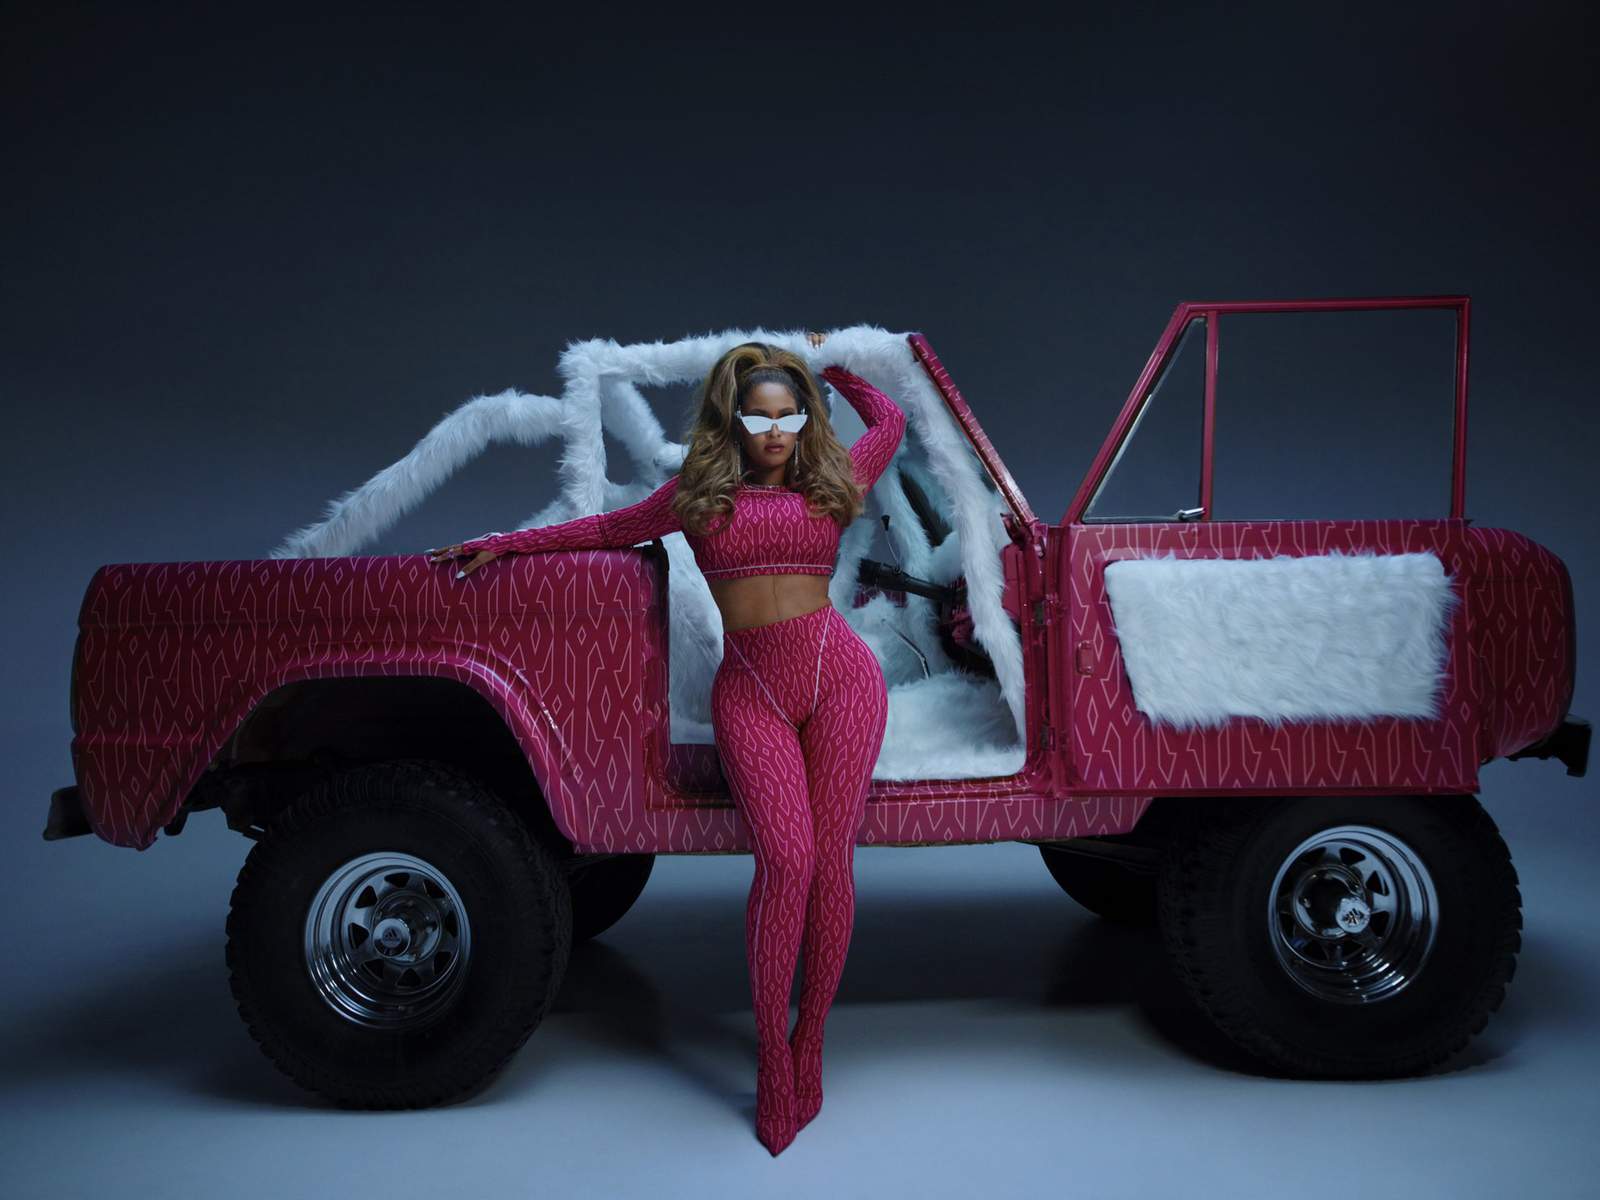 PHOTOS: Beyoncé announces new ‘Icy Park’ collection that will “bring the streets to the slopes”